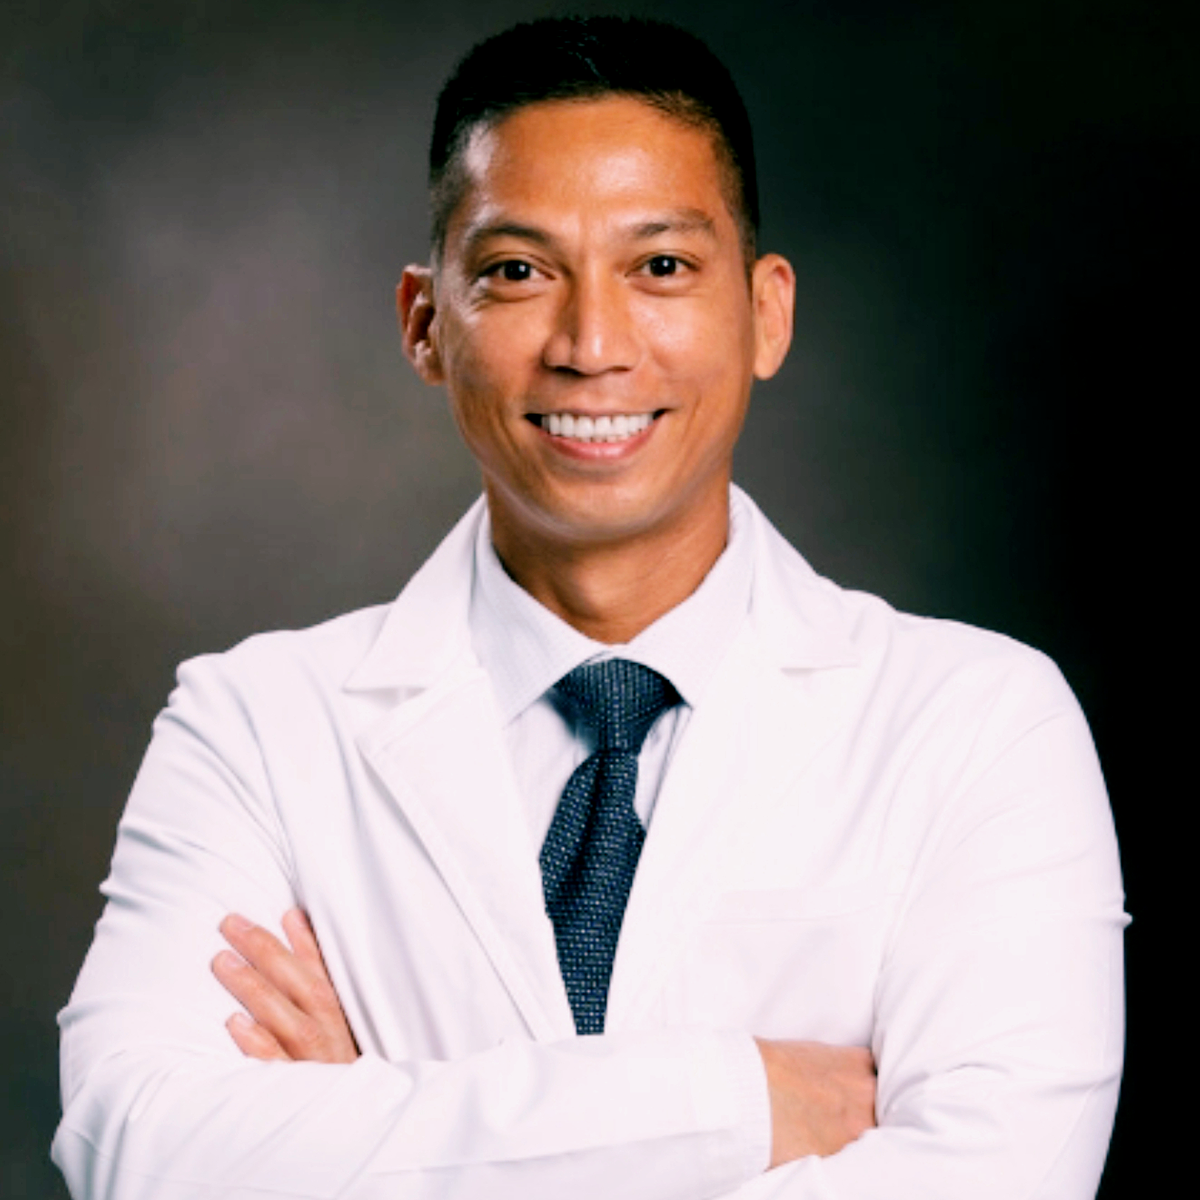 Alfredo Sy is a board-certified physician assistant in Tampa, Florida. His specialties include skin care, hair restoration, and skin cancer treatment. He is a member of the Society of Dermatology Physician Assistants and the Florida Society of Dermatology Physician Assistants. He completed the Physician Assistant Program at Nova Southeastern University in Orlando. He has been practicing dermatology since 2011.